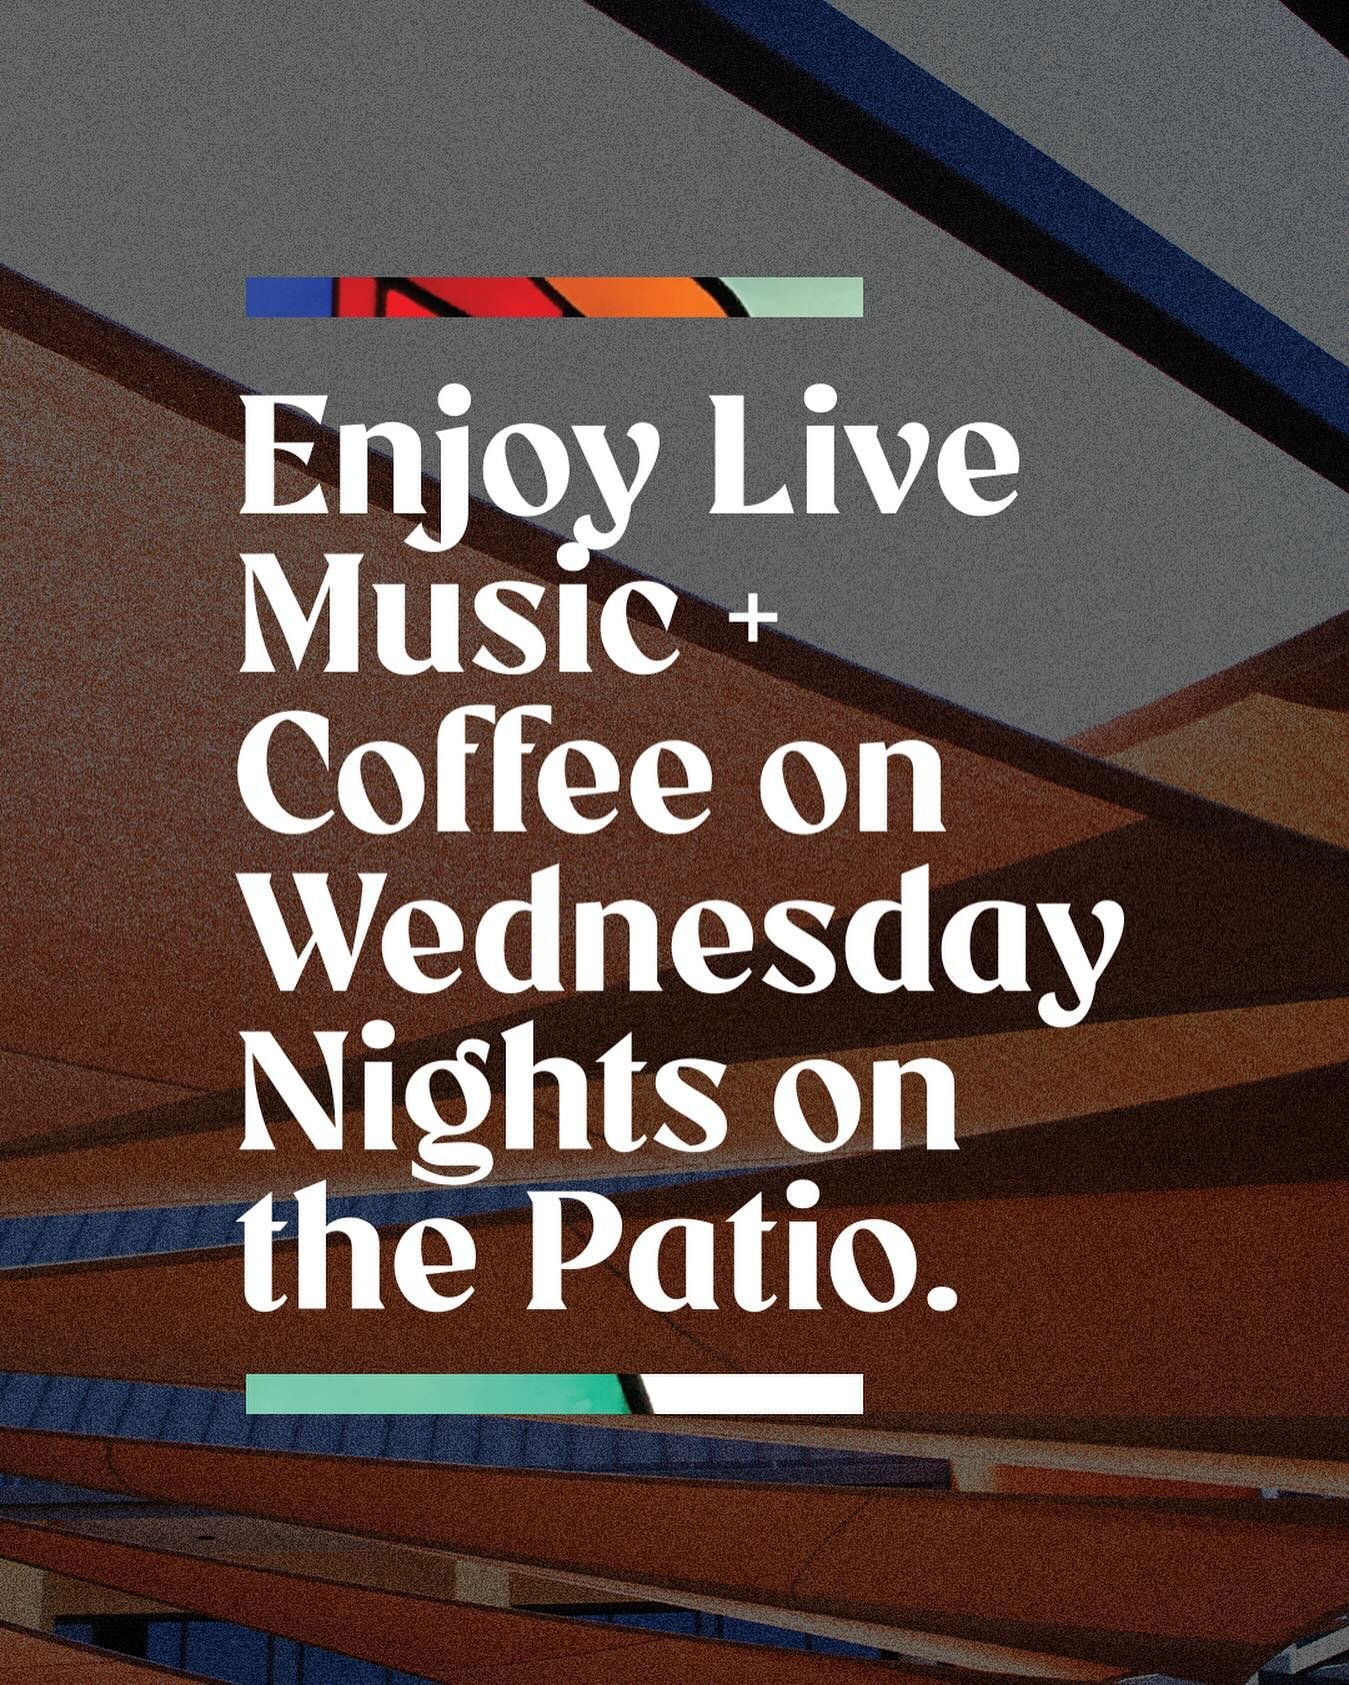 Join us at Grace Baptist Church for Music &amp; Coffee on the Patio! Enjoy some Grace Coffee offerings as local singer-songwriters take the stage. Mark your calendar for Wednesdays, April 17th and 24th, 6:30-8:30 PM&mdash;a night of melodies and fell